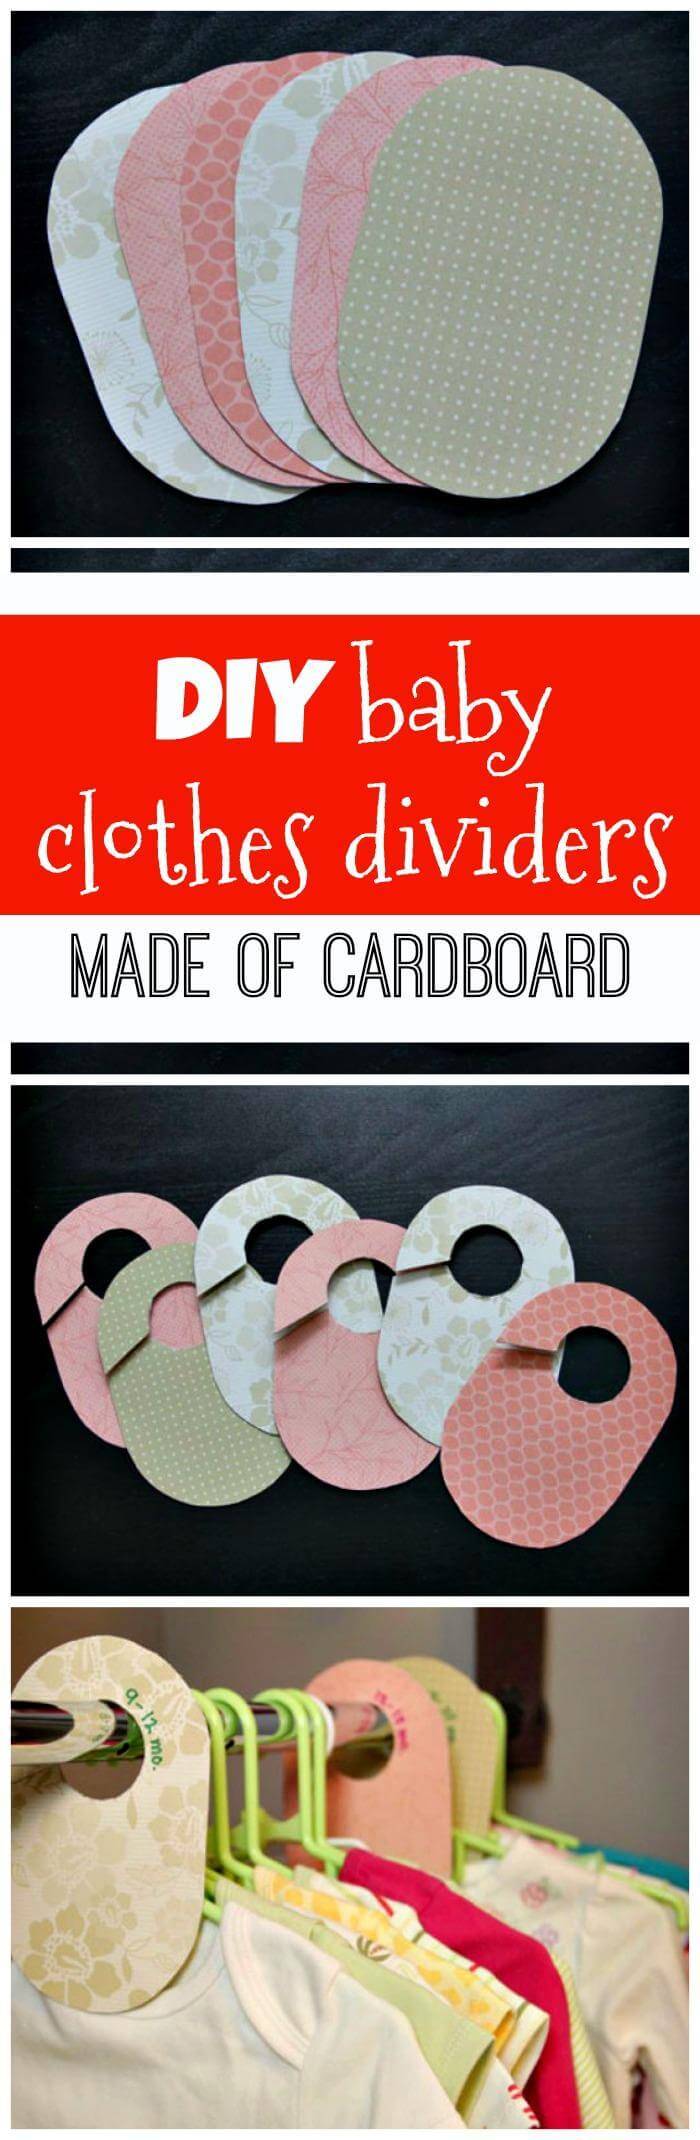 DIY baby clothes dividers made of cardboard